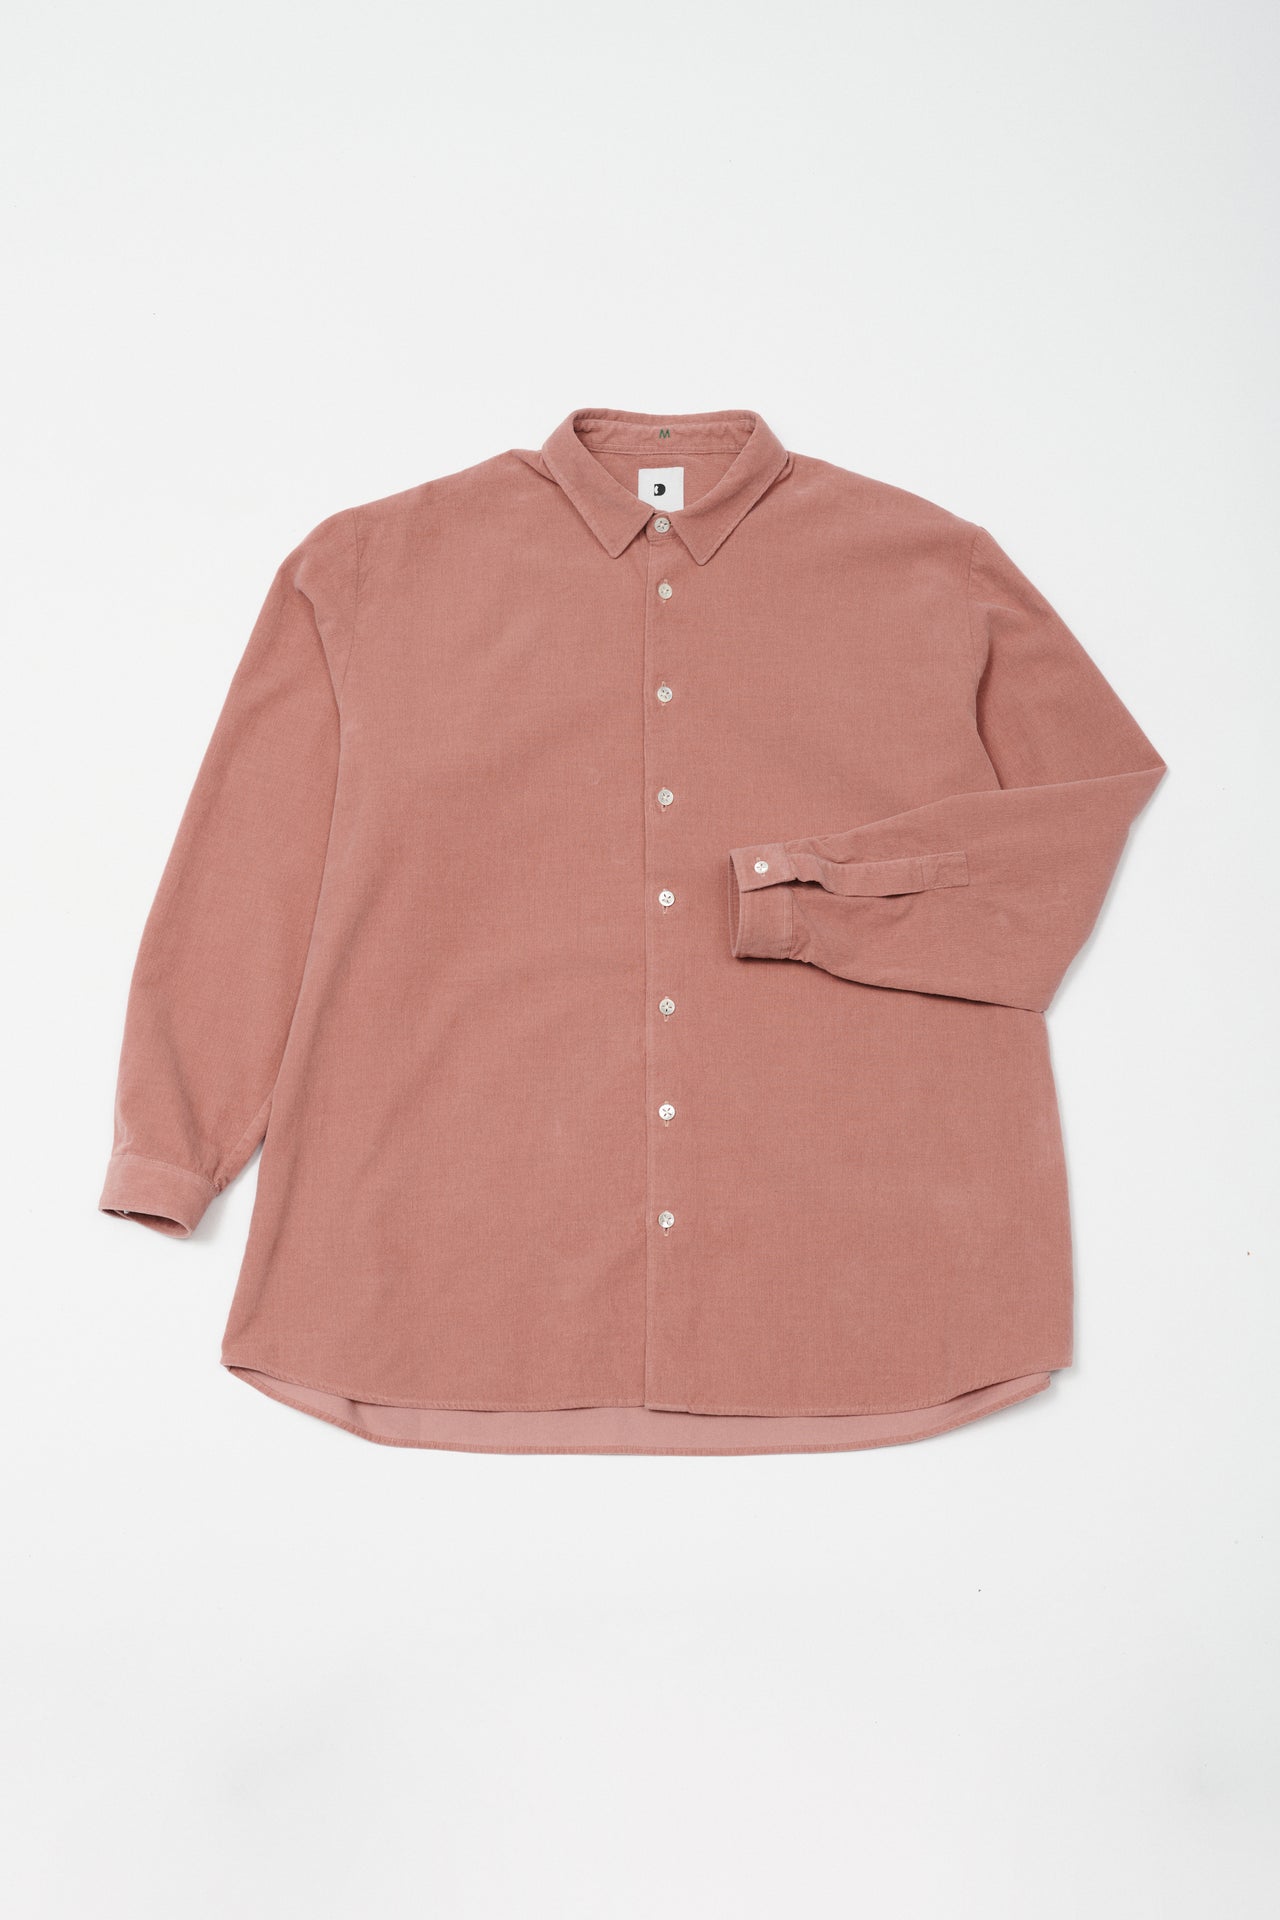 Boxy Unisex Shirt in Dusty Pink in the finest Japanese Baby Corduroy